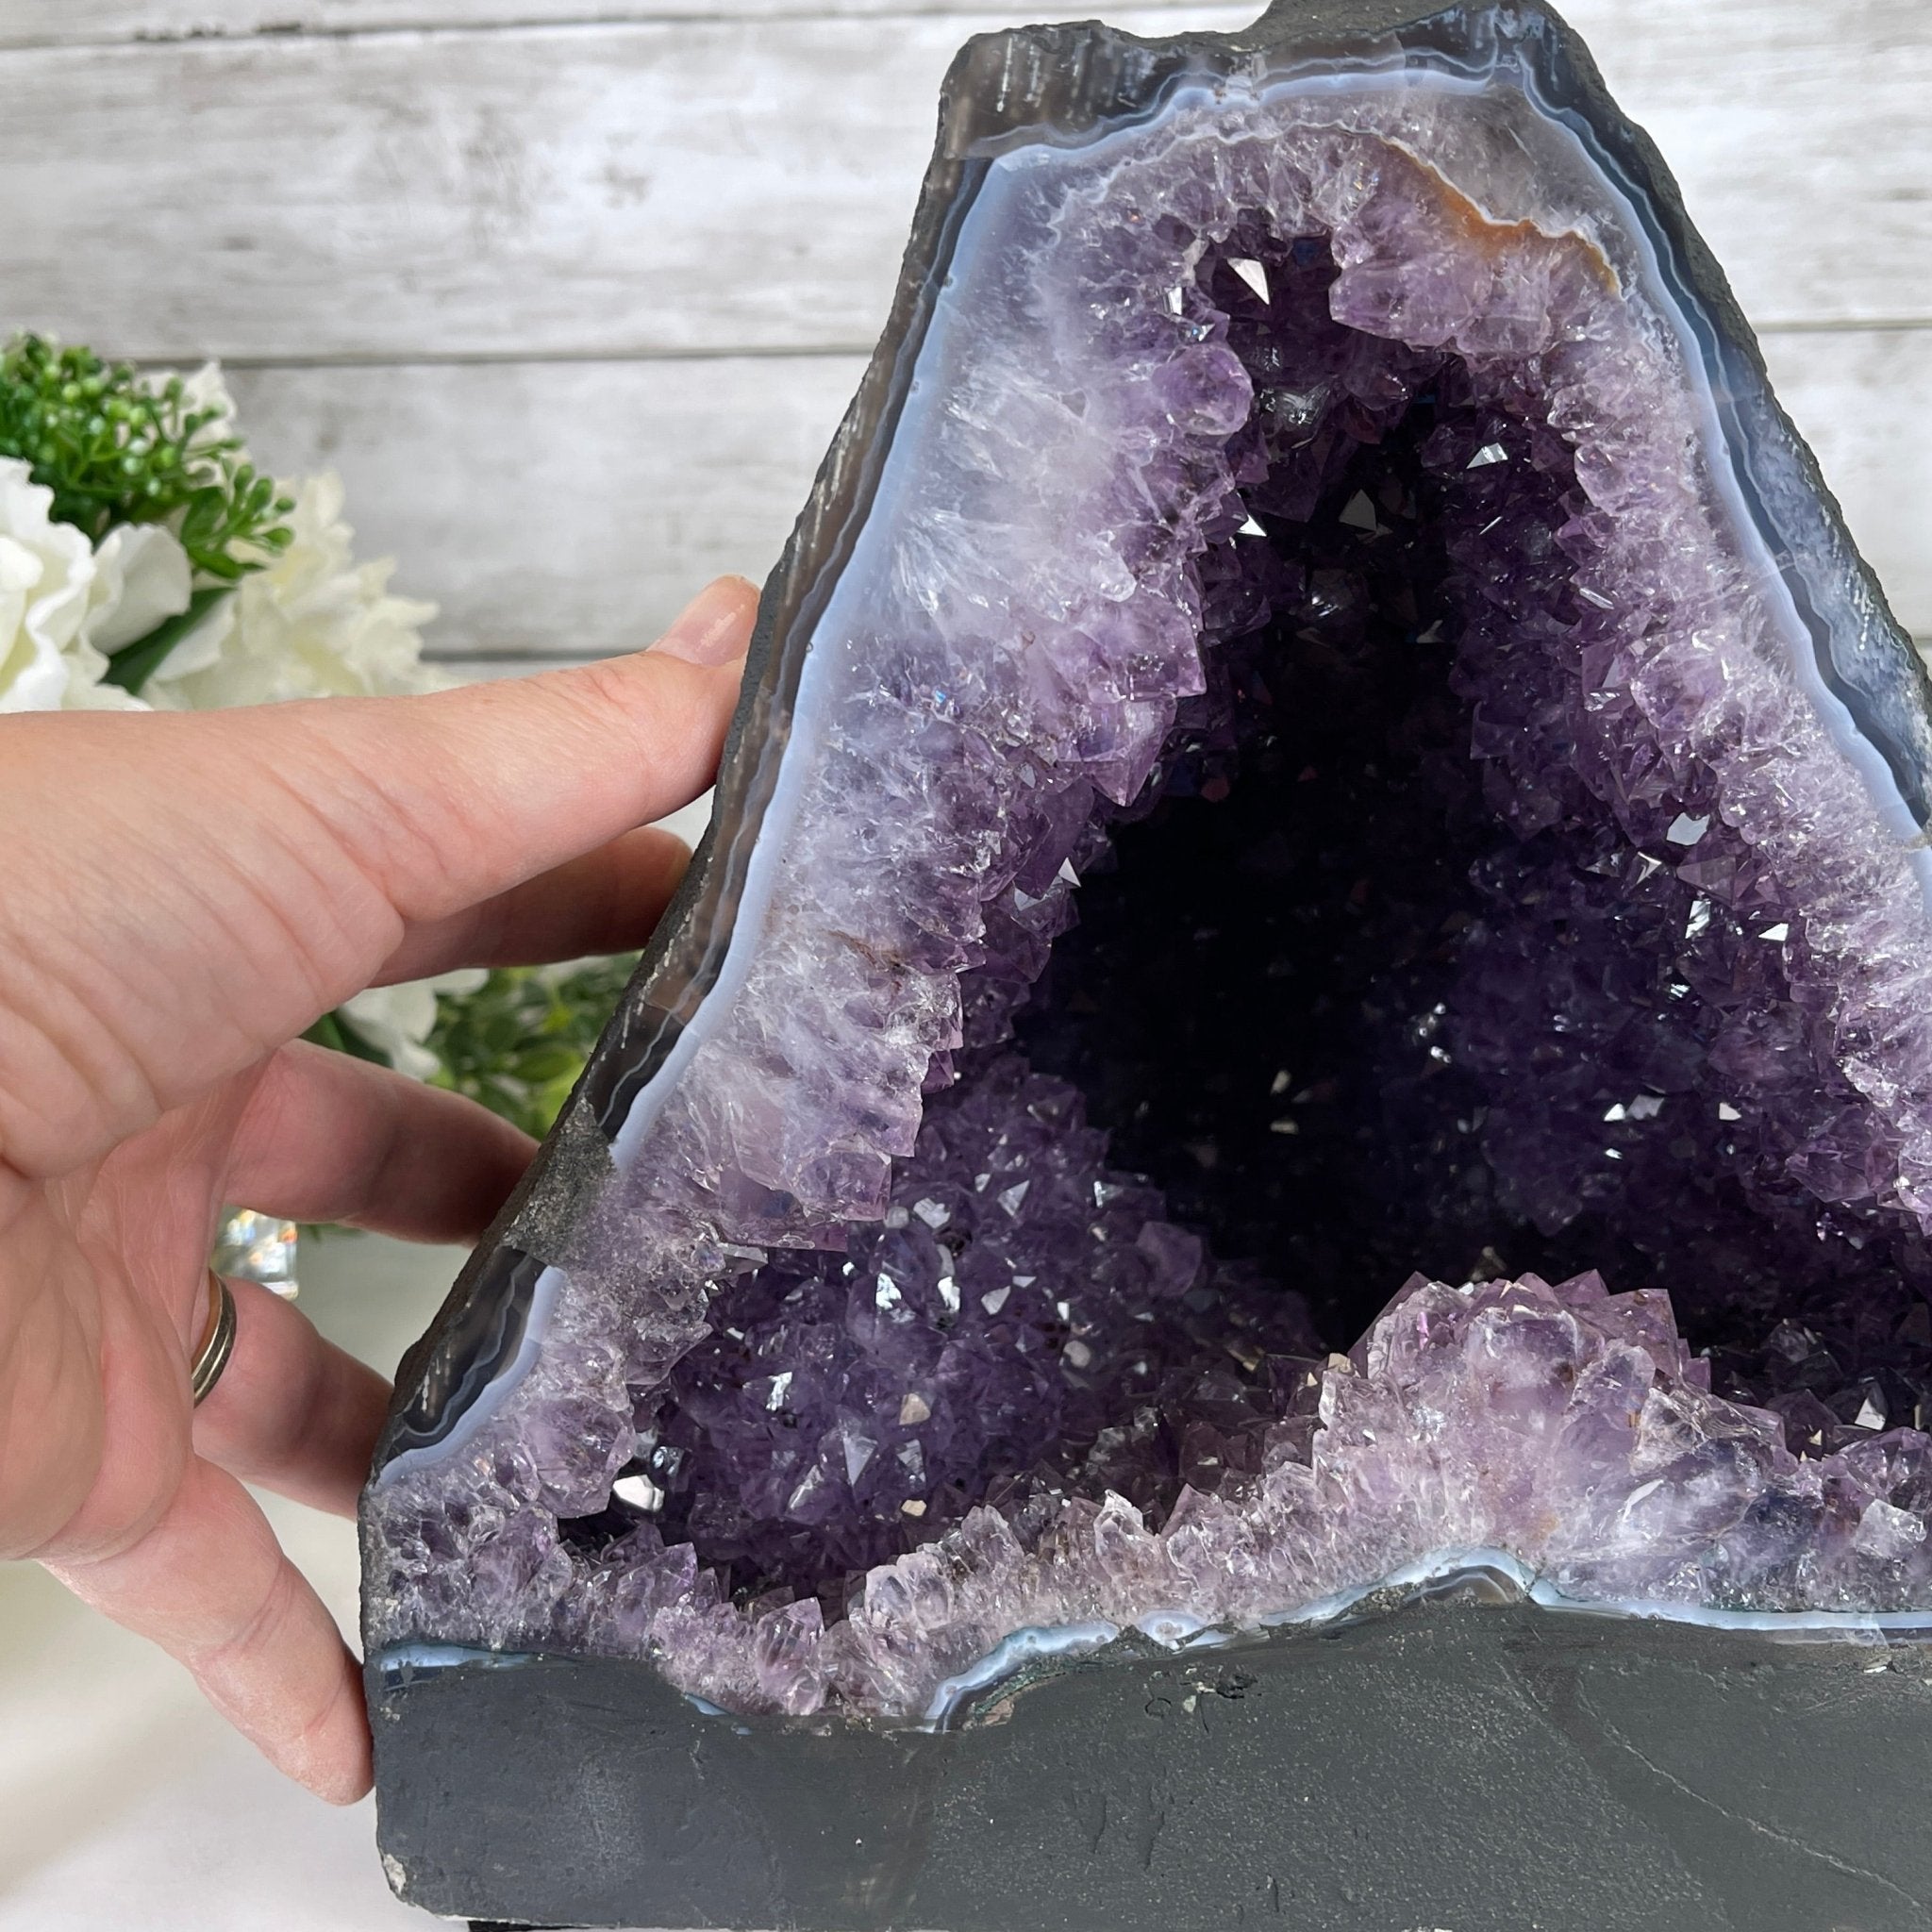 Extra Quality Brazilian Amethyst Cathedral, 9.1” tall & 22.1 lbs #5601-0584 by Brazil Gems - Brazil GemsBrazil GemsExtra Quality Brazilian Amethyst Cathedral, 9.1” tall & 22.1 lbs #5601-0584 by Brazil GemsCathedrals5601-0584